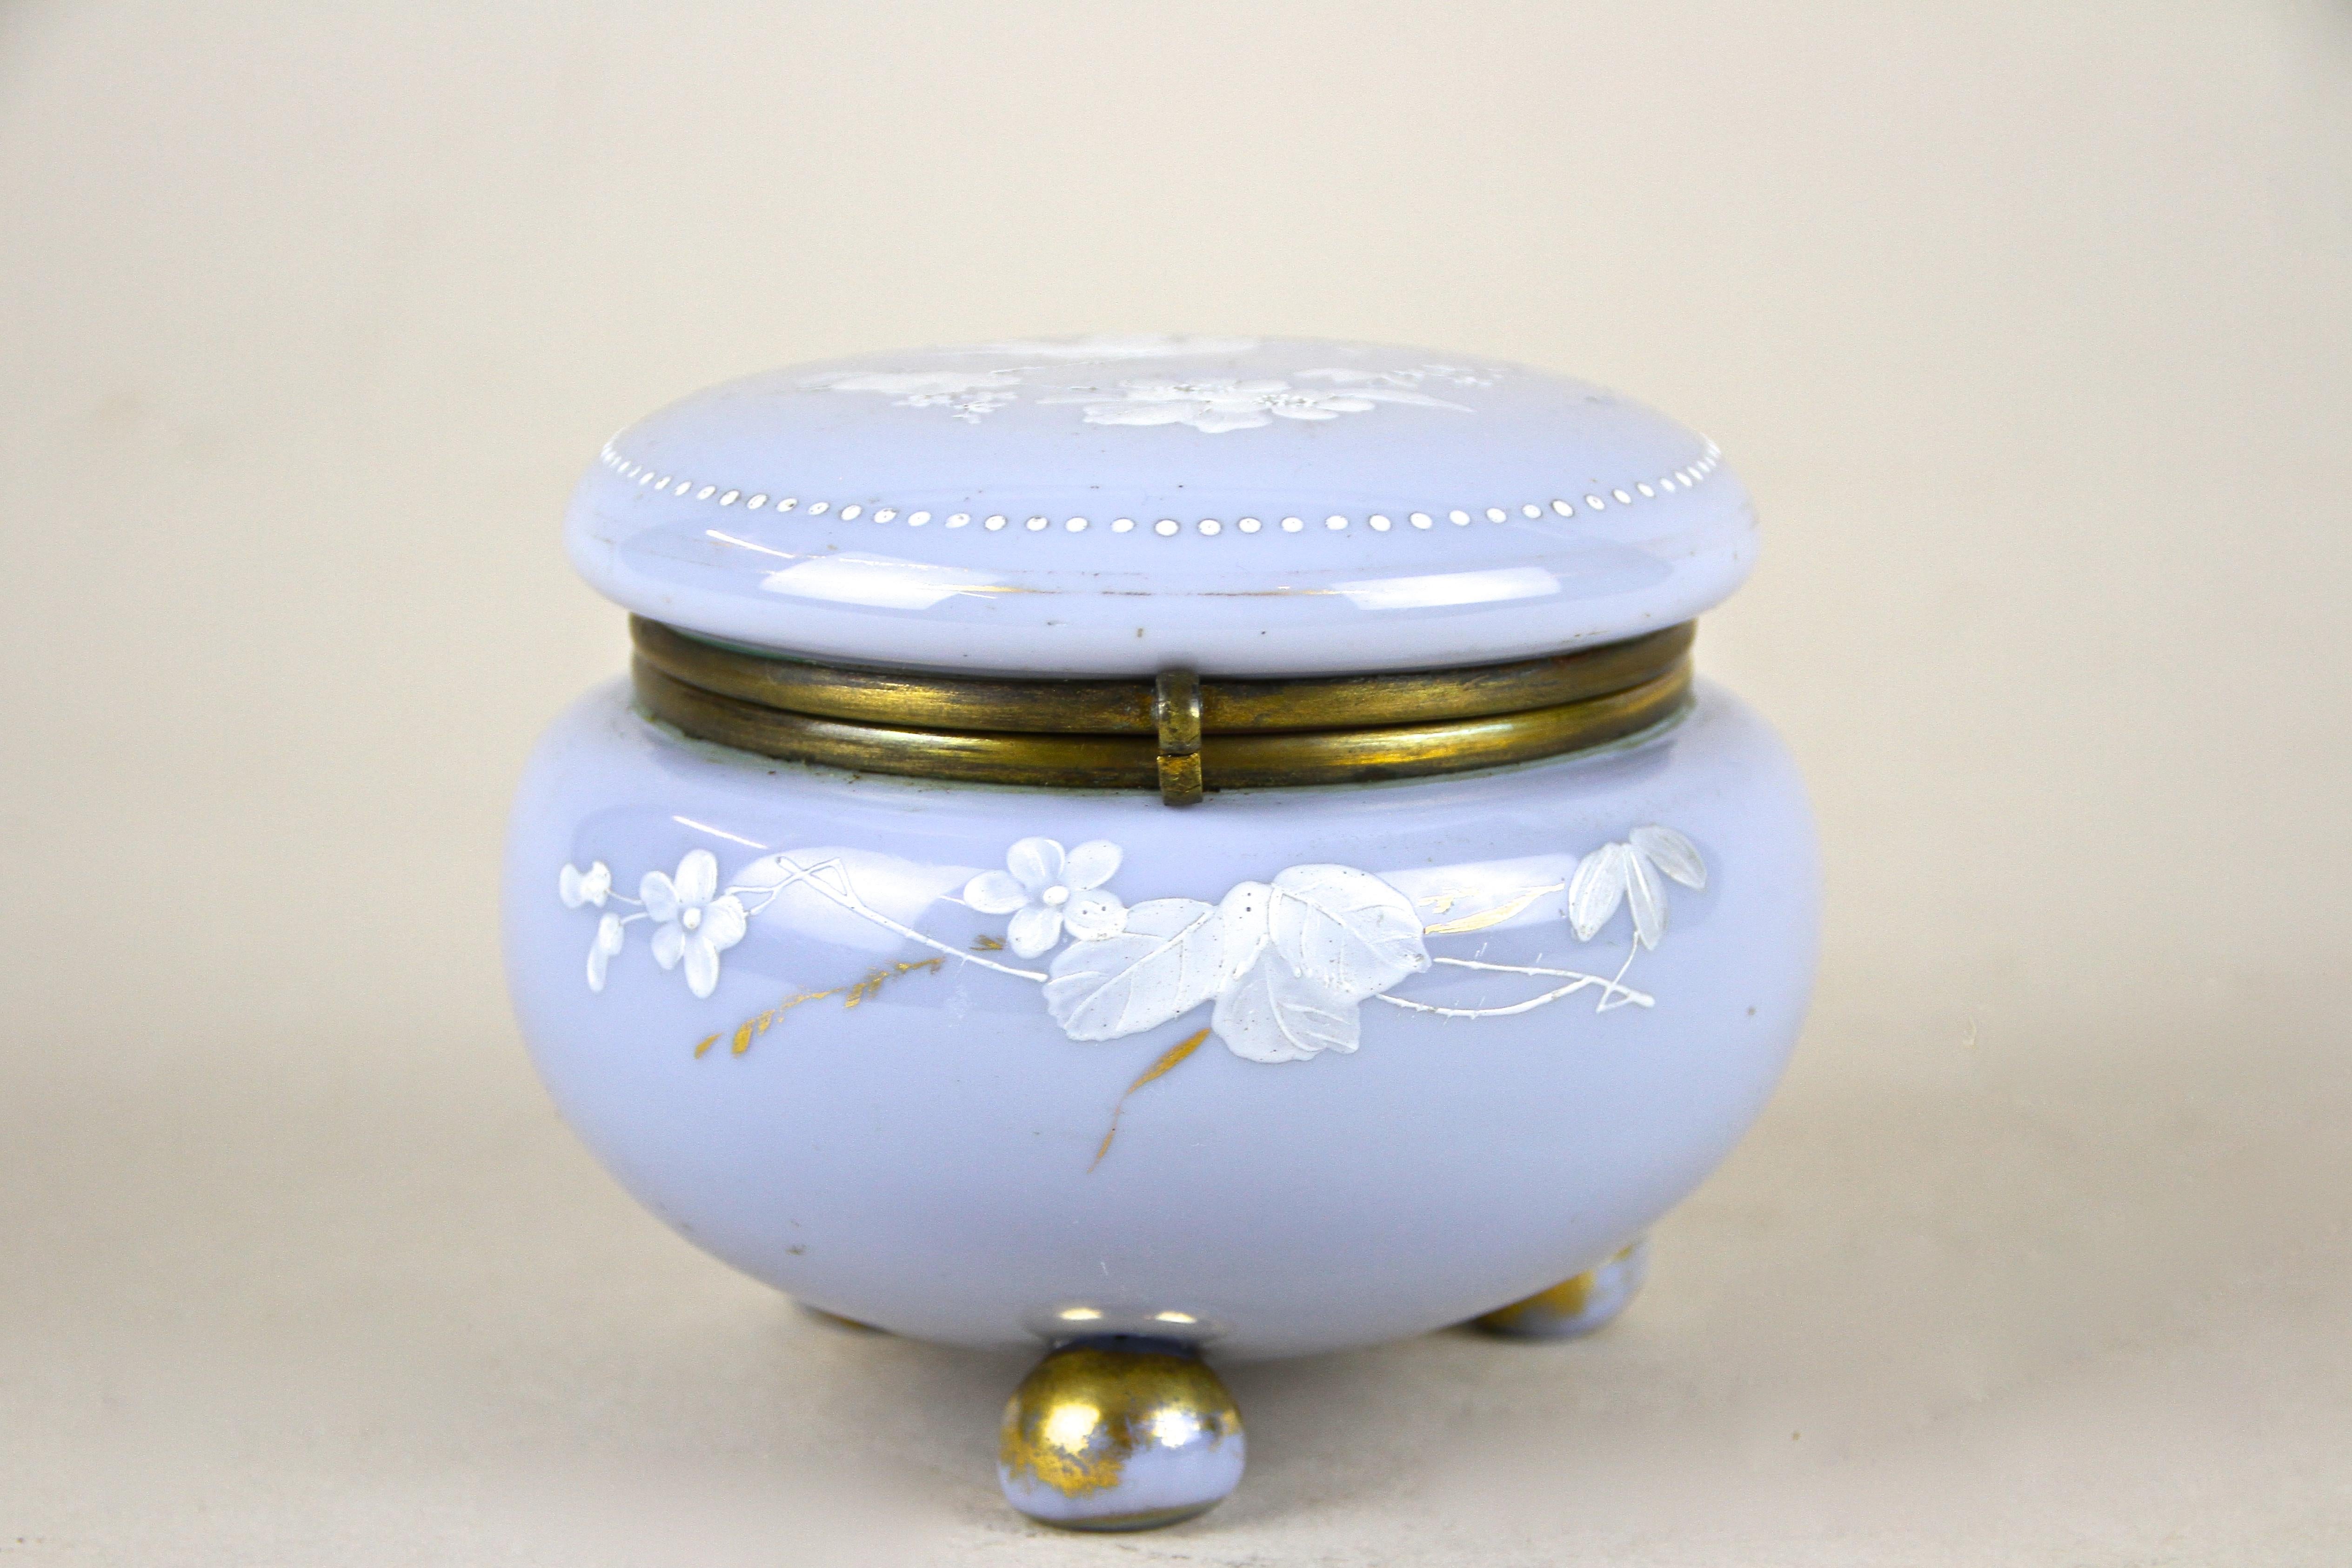 Enchanting light blue glass box adorned by lovely hand painted enamel paintings from the early period around 1900 in Austria. An absolute lovely piece of glass art impressing with wonderful enamel painted flowers and a bird on top of the lid. An